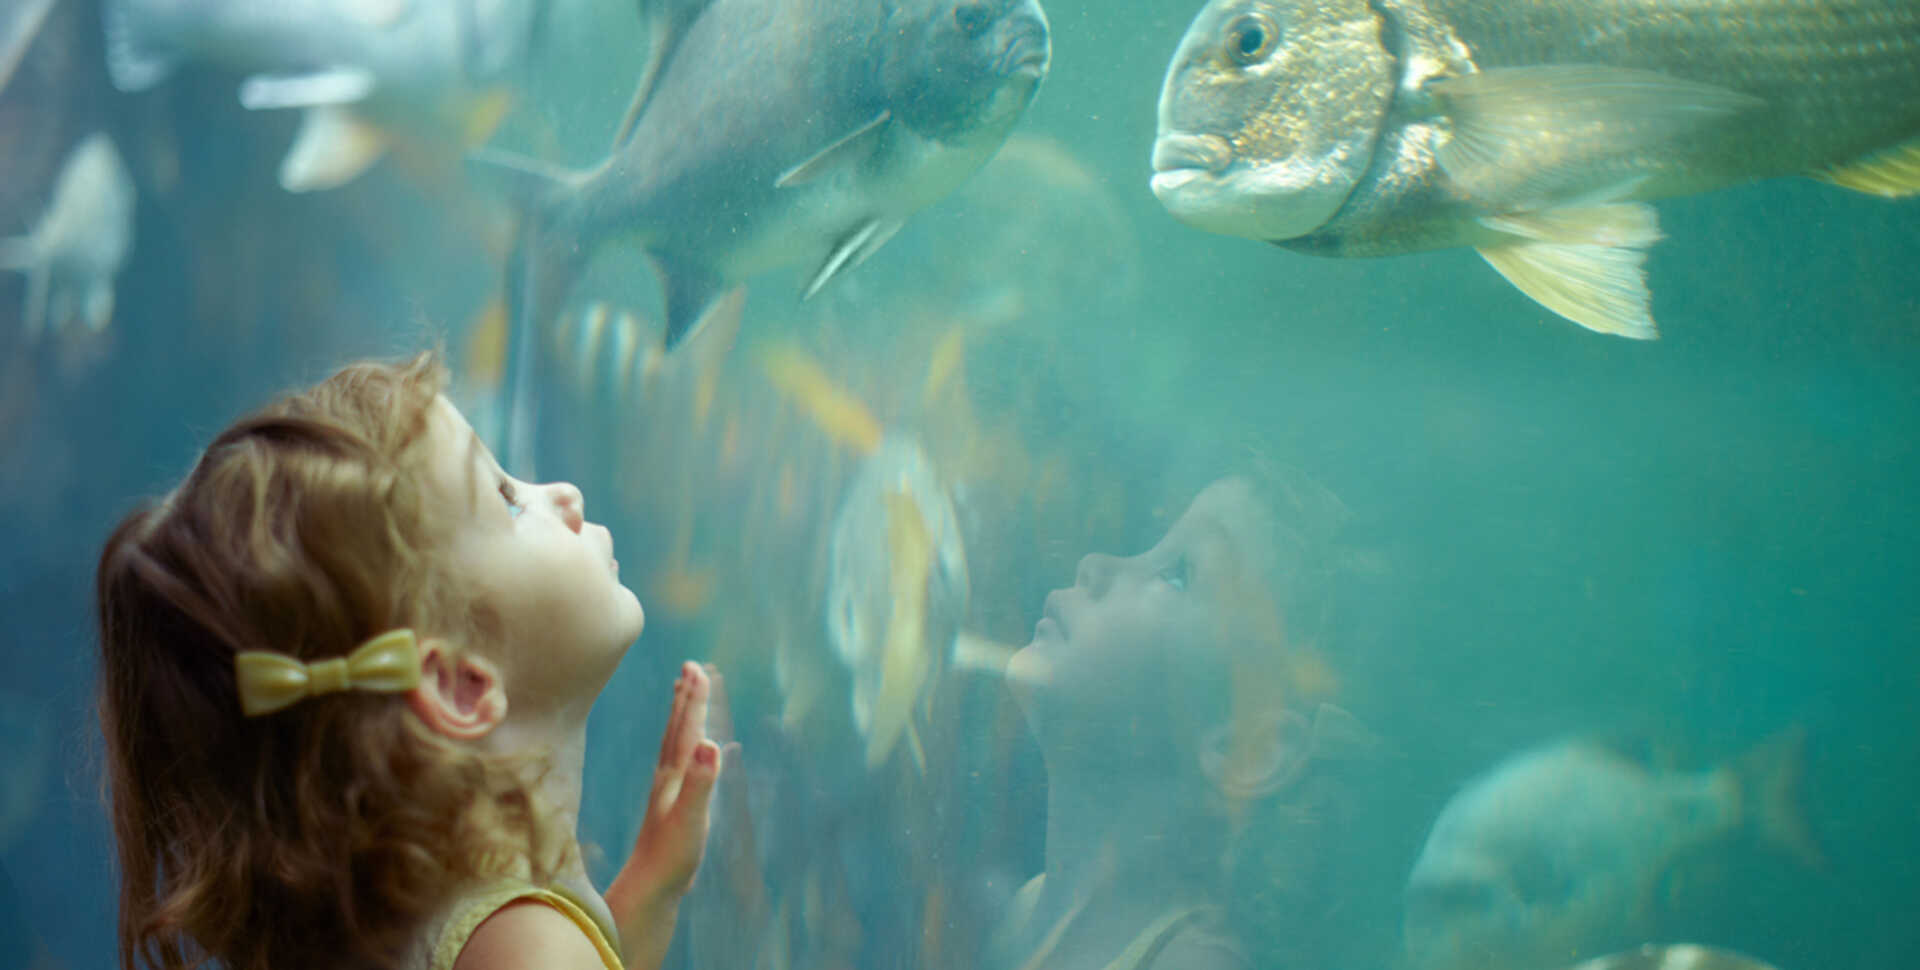 Young girl gazes up in awe at a large fish in the California Coast exhibit